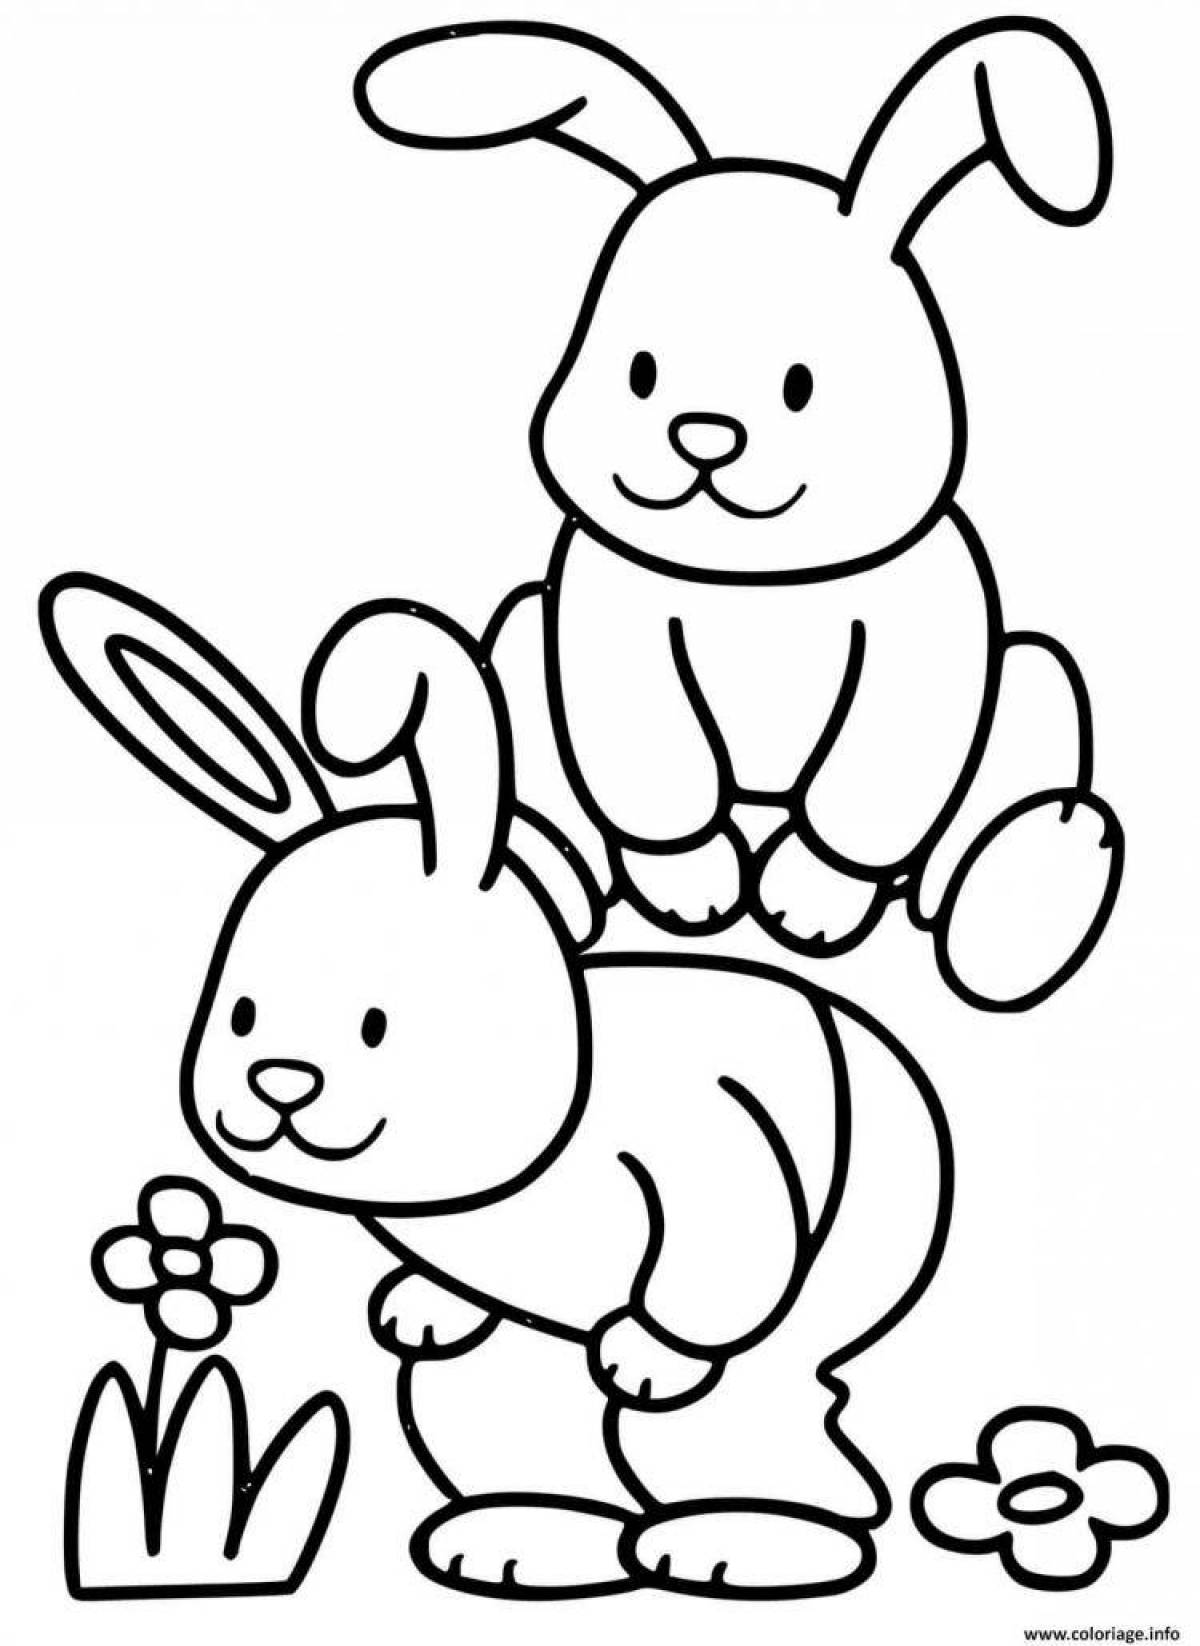 Colorful rabbit coloring book for kids